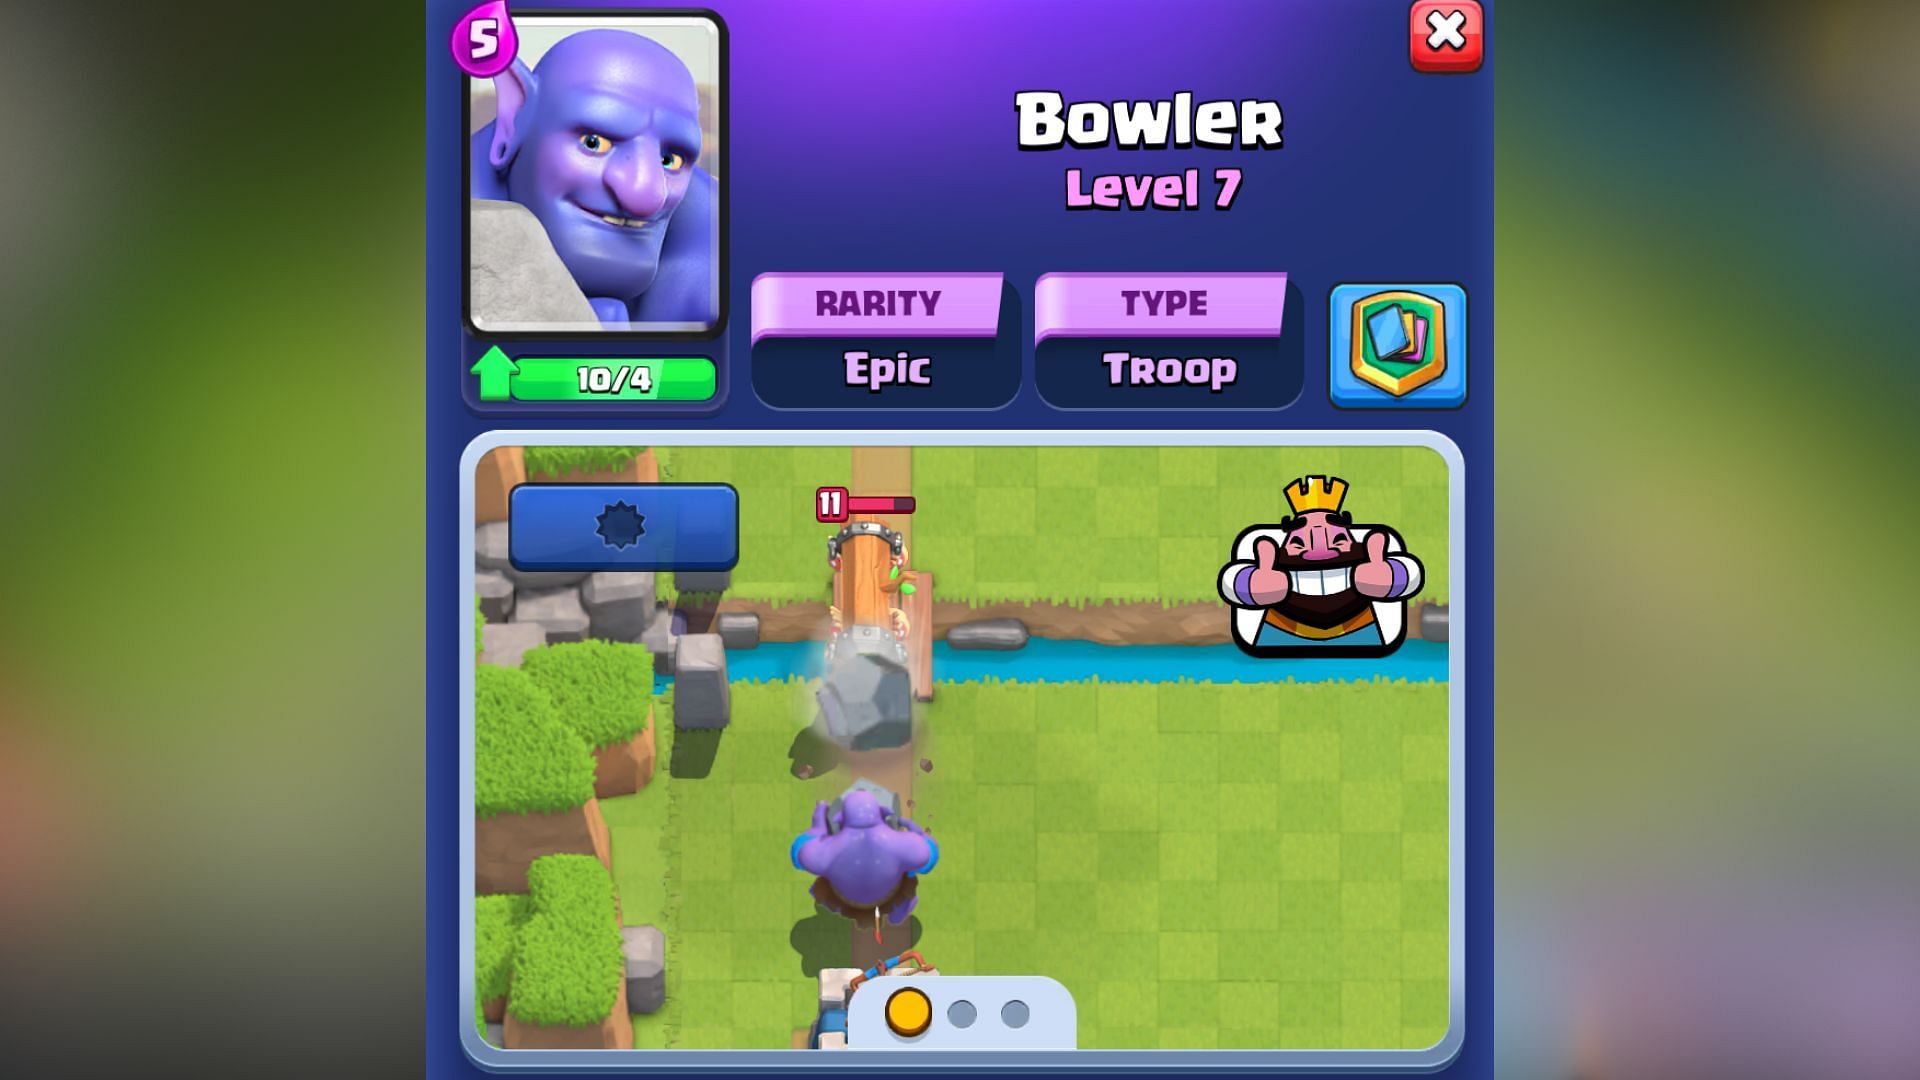 Bowler in Clash Royale (Image via SuperCell)